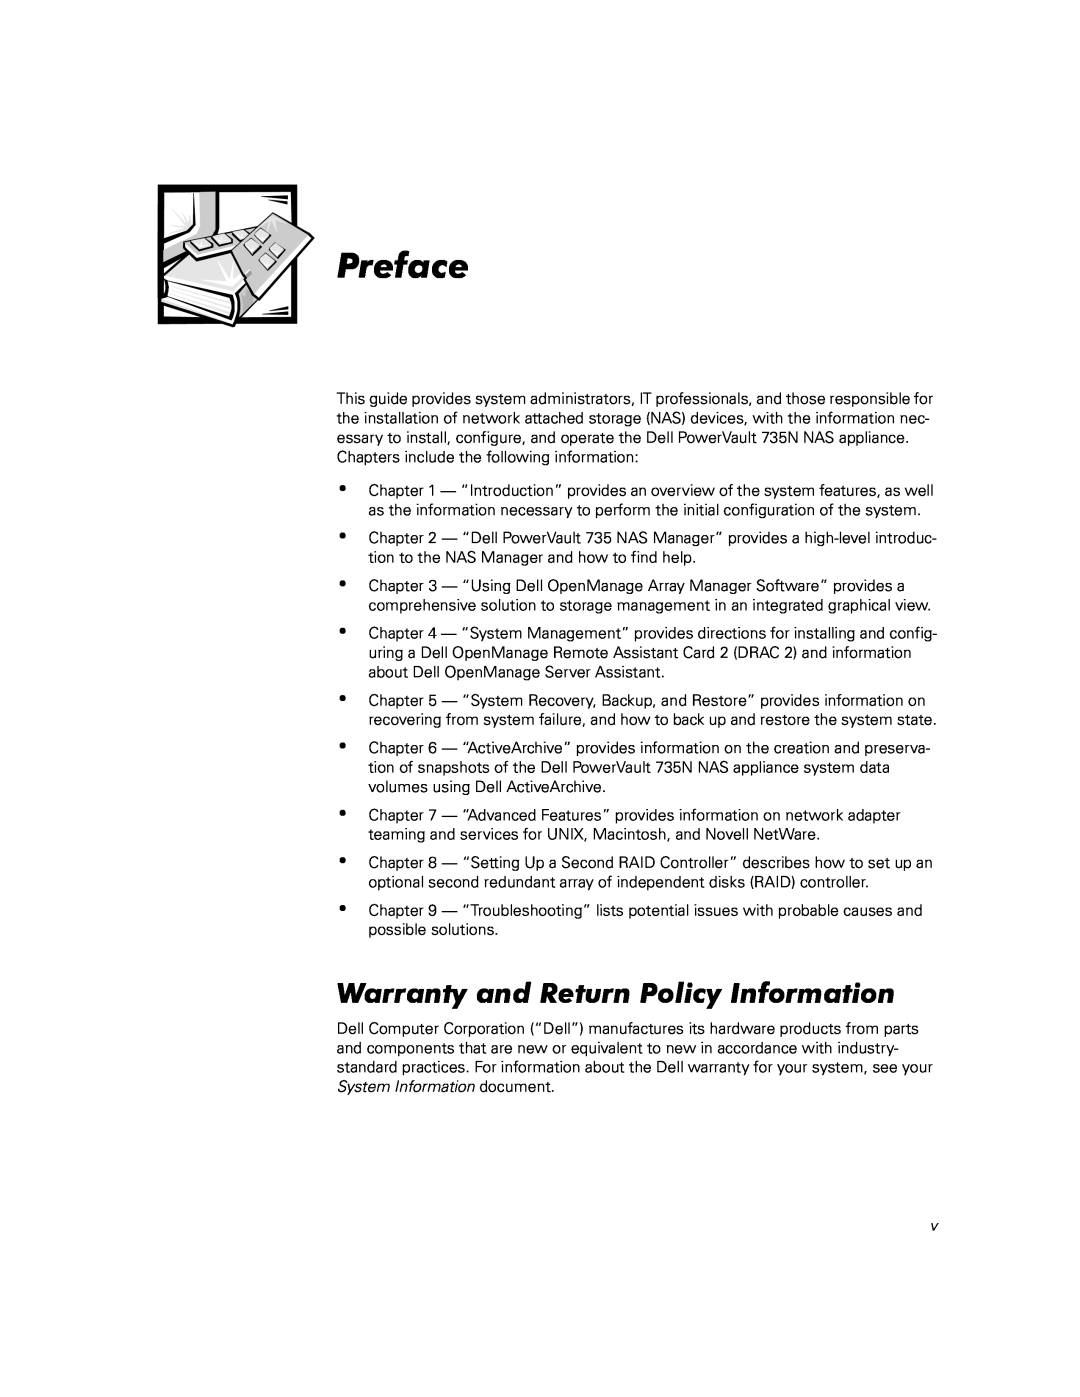 Dell 735 warranty Warranty and Return Policy Information, Preface 